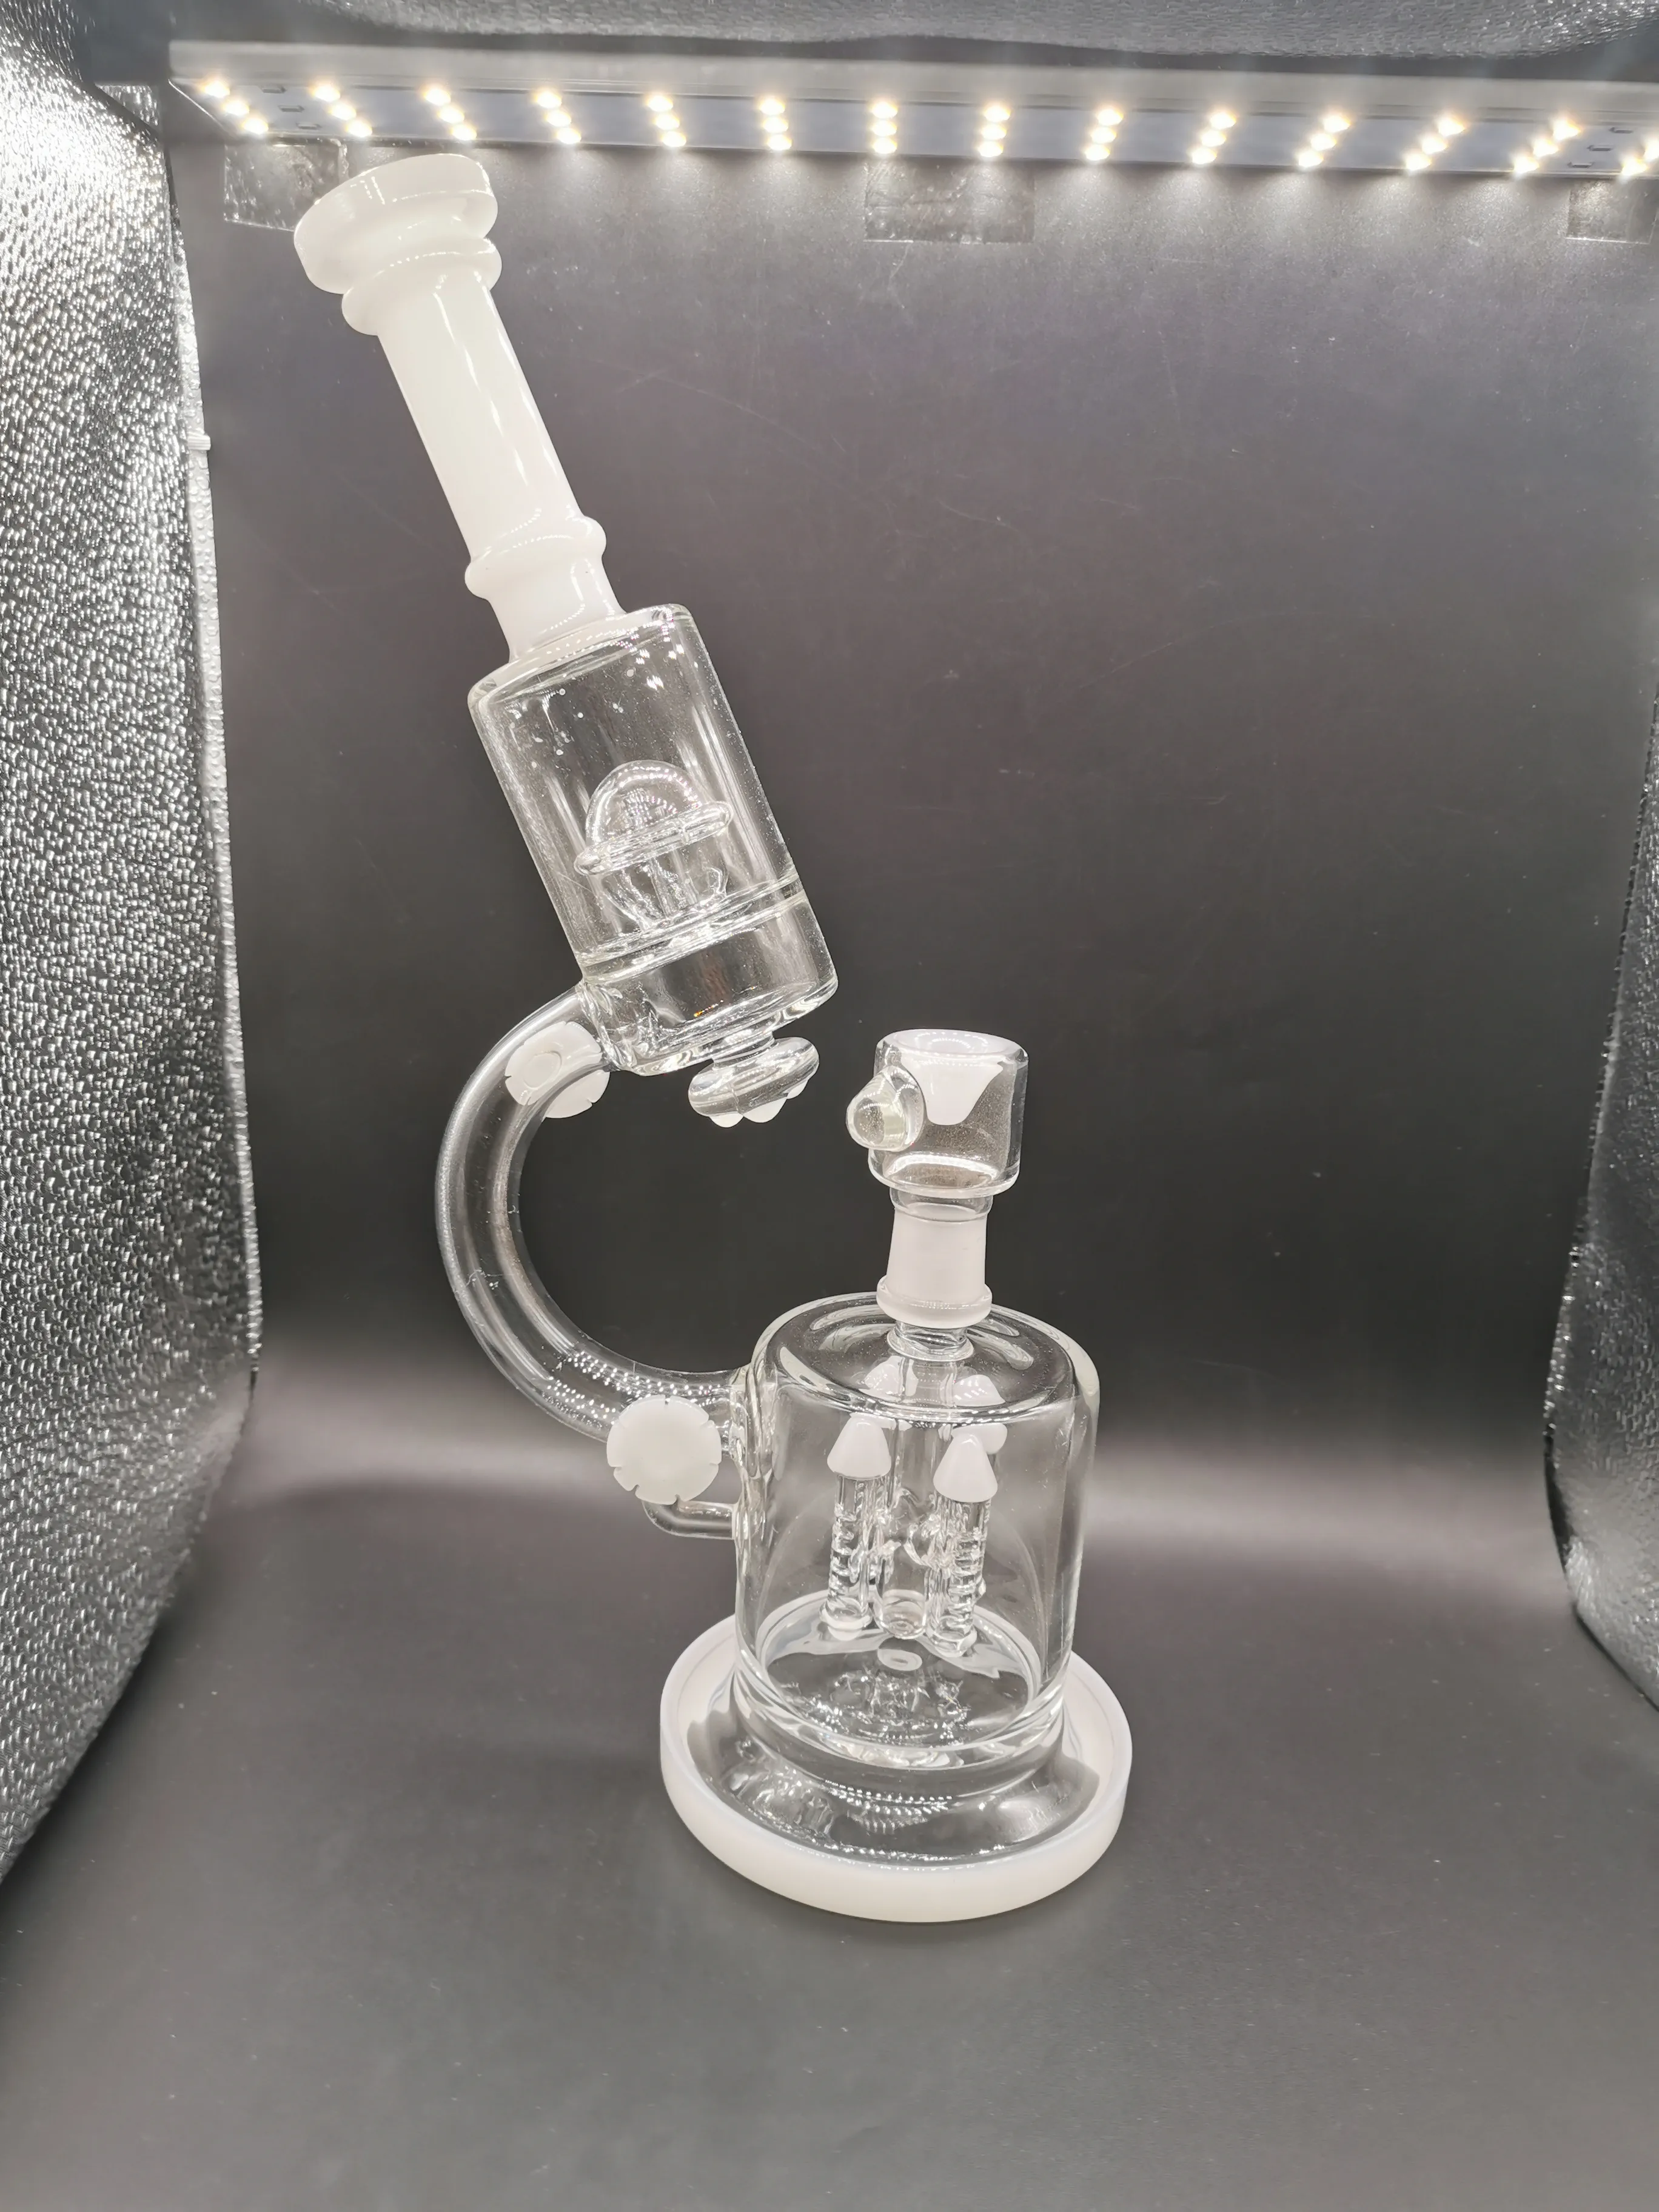 Wholesale Pink Turtle Glass Bong With Recycler, Thick Beaker Bum, 14mm  Joint, Banger, And Affordable Smoking Hookah For Water Bongs From  Glassmill, $3.56